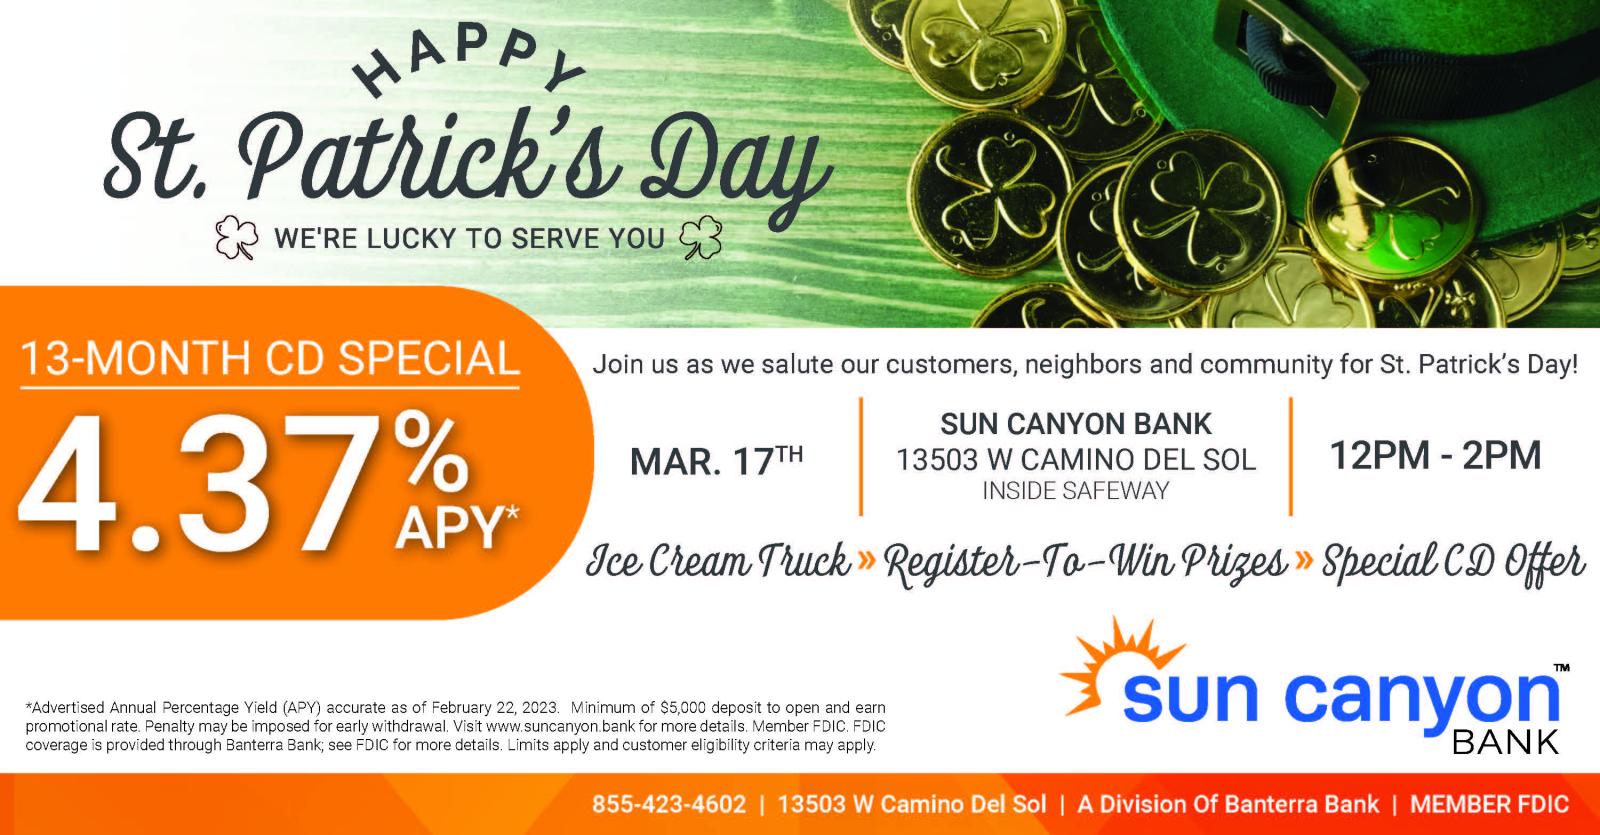 Sun Canyon's St. Patrick's Day Event is on March 17, 2023 from 12pm - 2pm at our Sun City West location. 